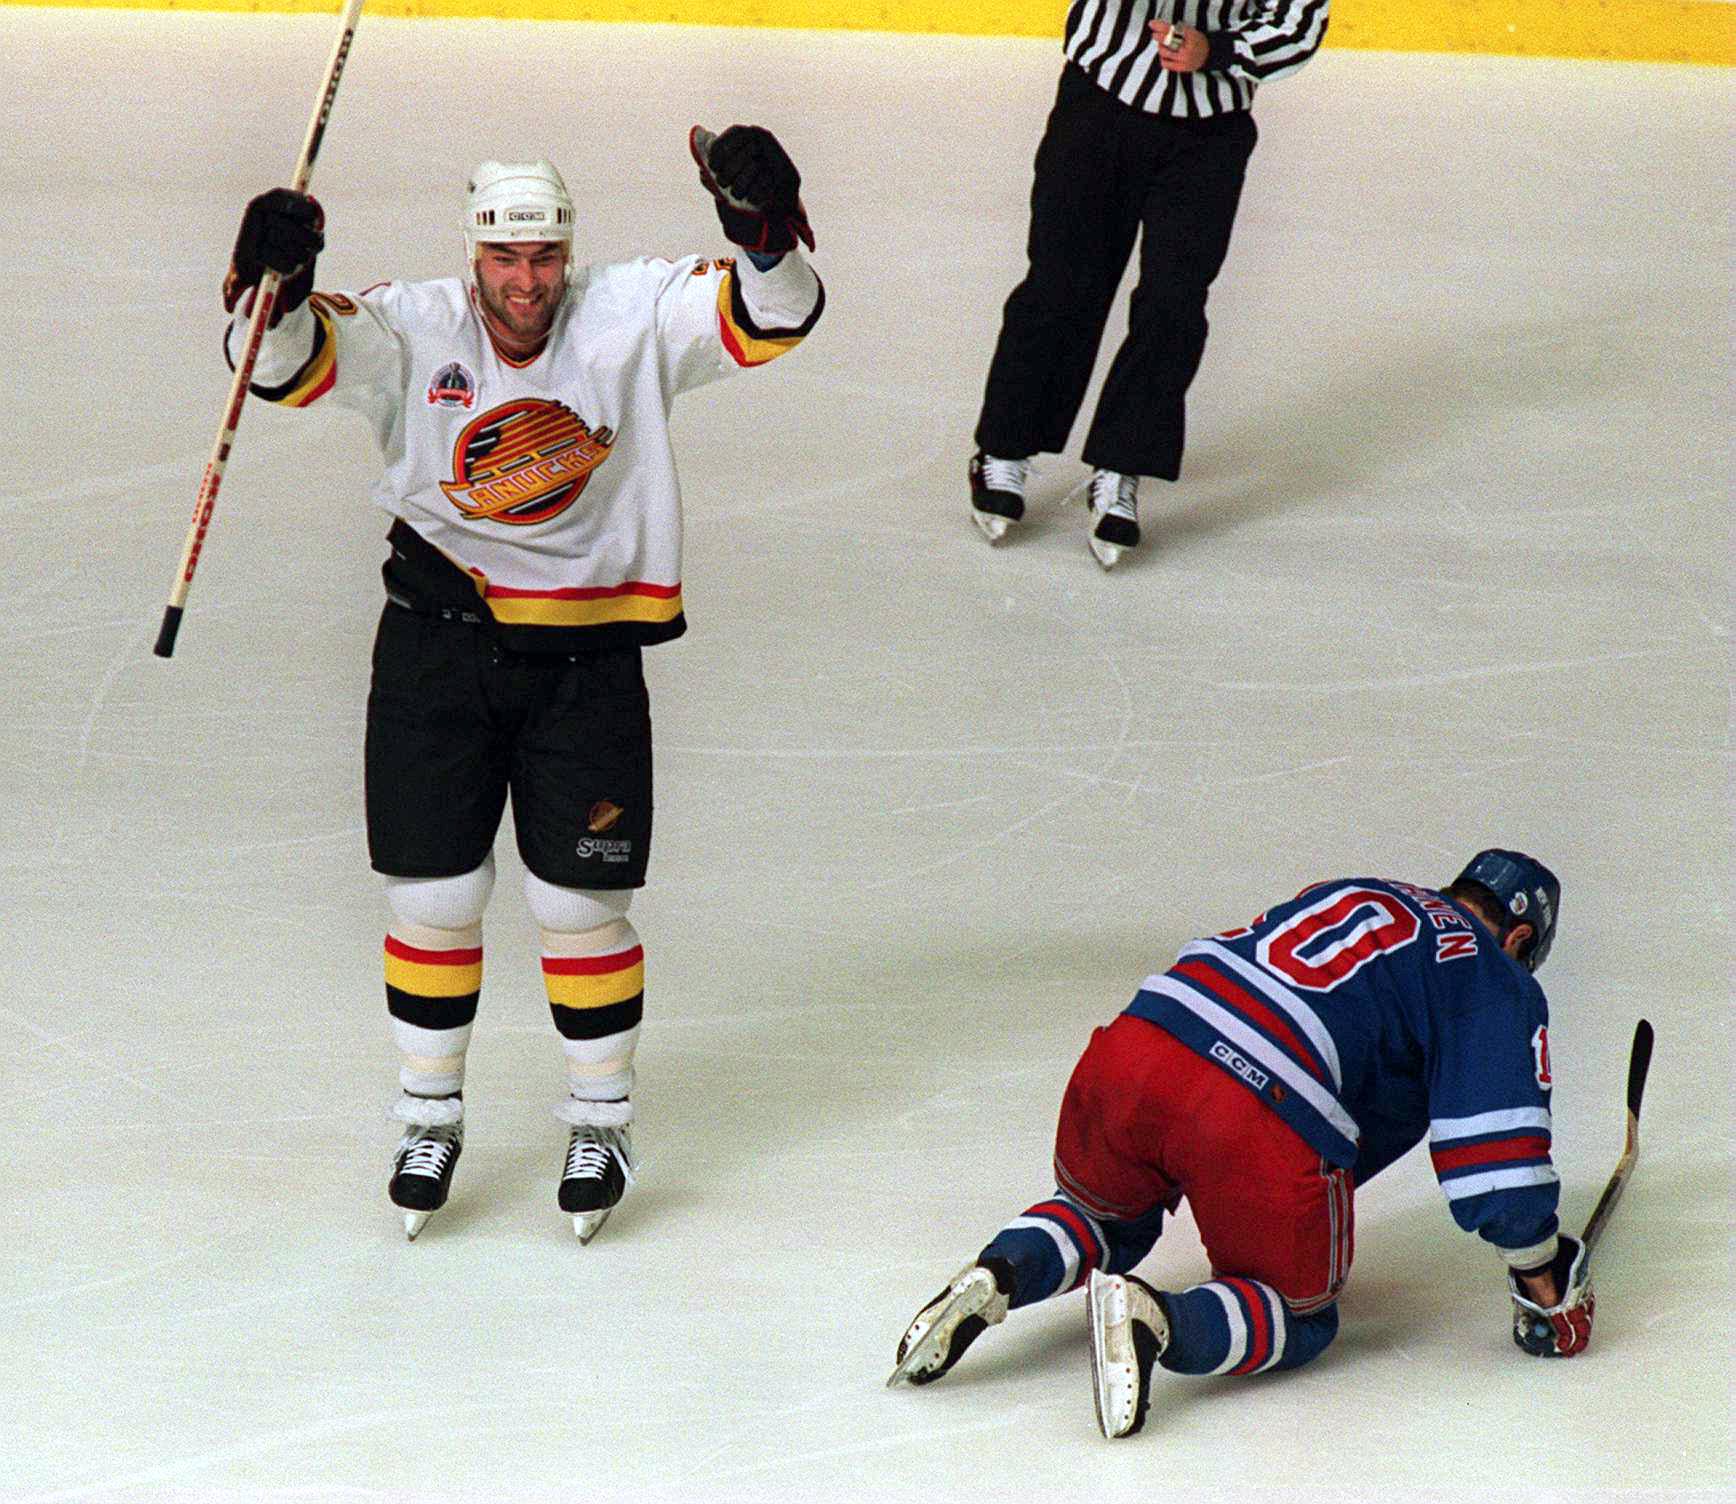 11 Jun 1994: CANUCKS DEFENSEMAN JEFF BROWN CELEBRATES AFTER SCORING TO PUT HIS TEAM UP 1-0 DURING THE FIRST PERIOD OF GAME SIX OF THE STANLEY CUP FINALS AGAINST THE RANGERS IN VANCOUVER, BRITISH COLUMBIA. AT RIGHT IS FALLEN RANGER''S WINGER ESA TIKKANEN.